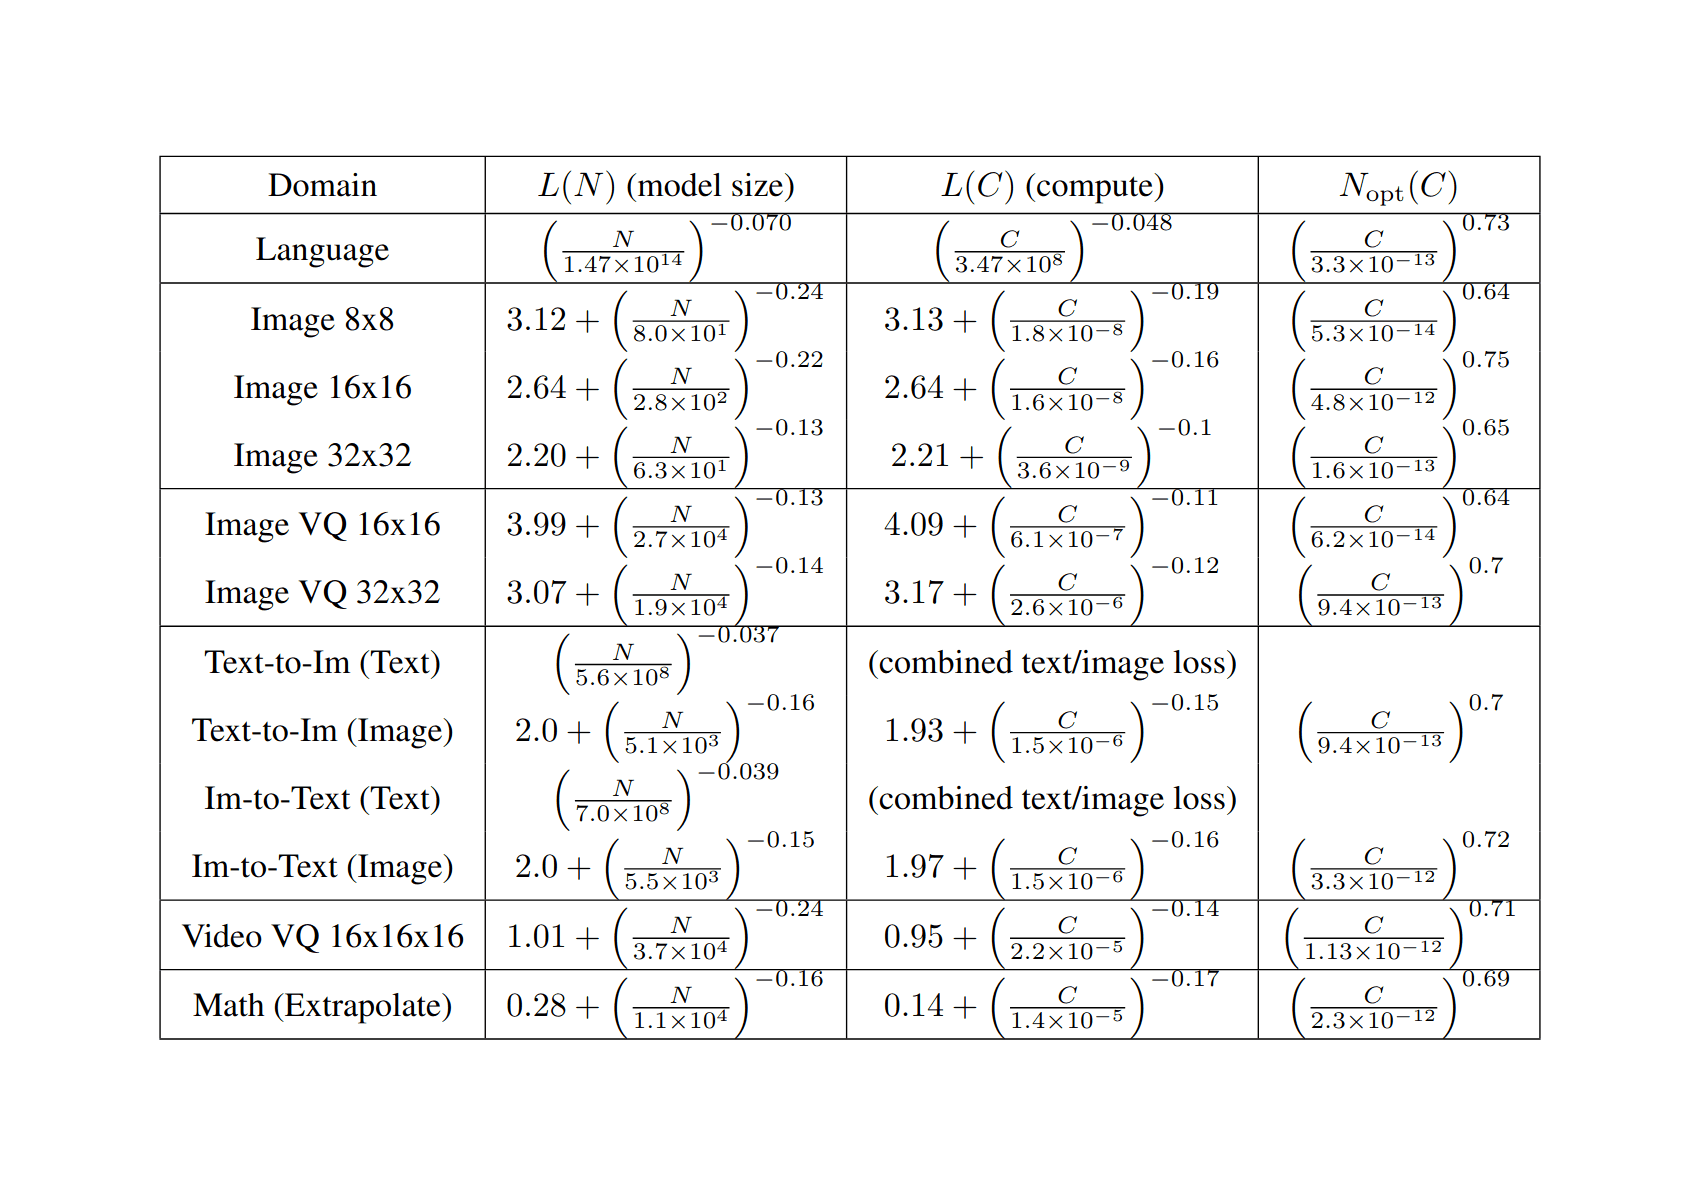 Table 1: Summary of scaling laws—In this table we summarize the model size and compute scaling fits to equation (1.1) along with Nopt(C), with the loss in nats/​token, and compute measured in petaflop-days. In most cases the irreducible losses match quite well between model size and compute scaling laws. The math compute scaling law may be affected by the use of weight decay, which typically hurts performance early in training and improves performance late in training. The compute scaling results and data for language are from [BMR+20], while_N_opt(C)comes from [KMH+20]. Unfortunately, even with data from the largest language models we cannot yet obtain a meaningful estimate for the entropy of natural language.